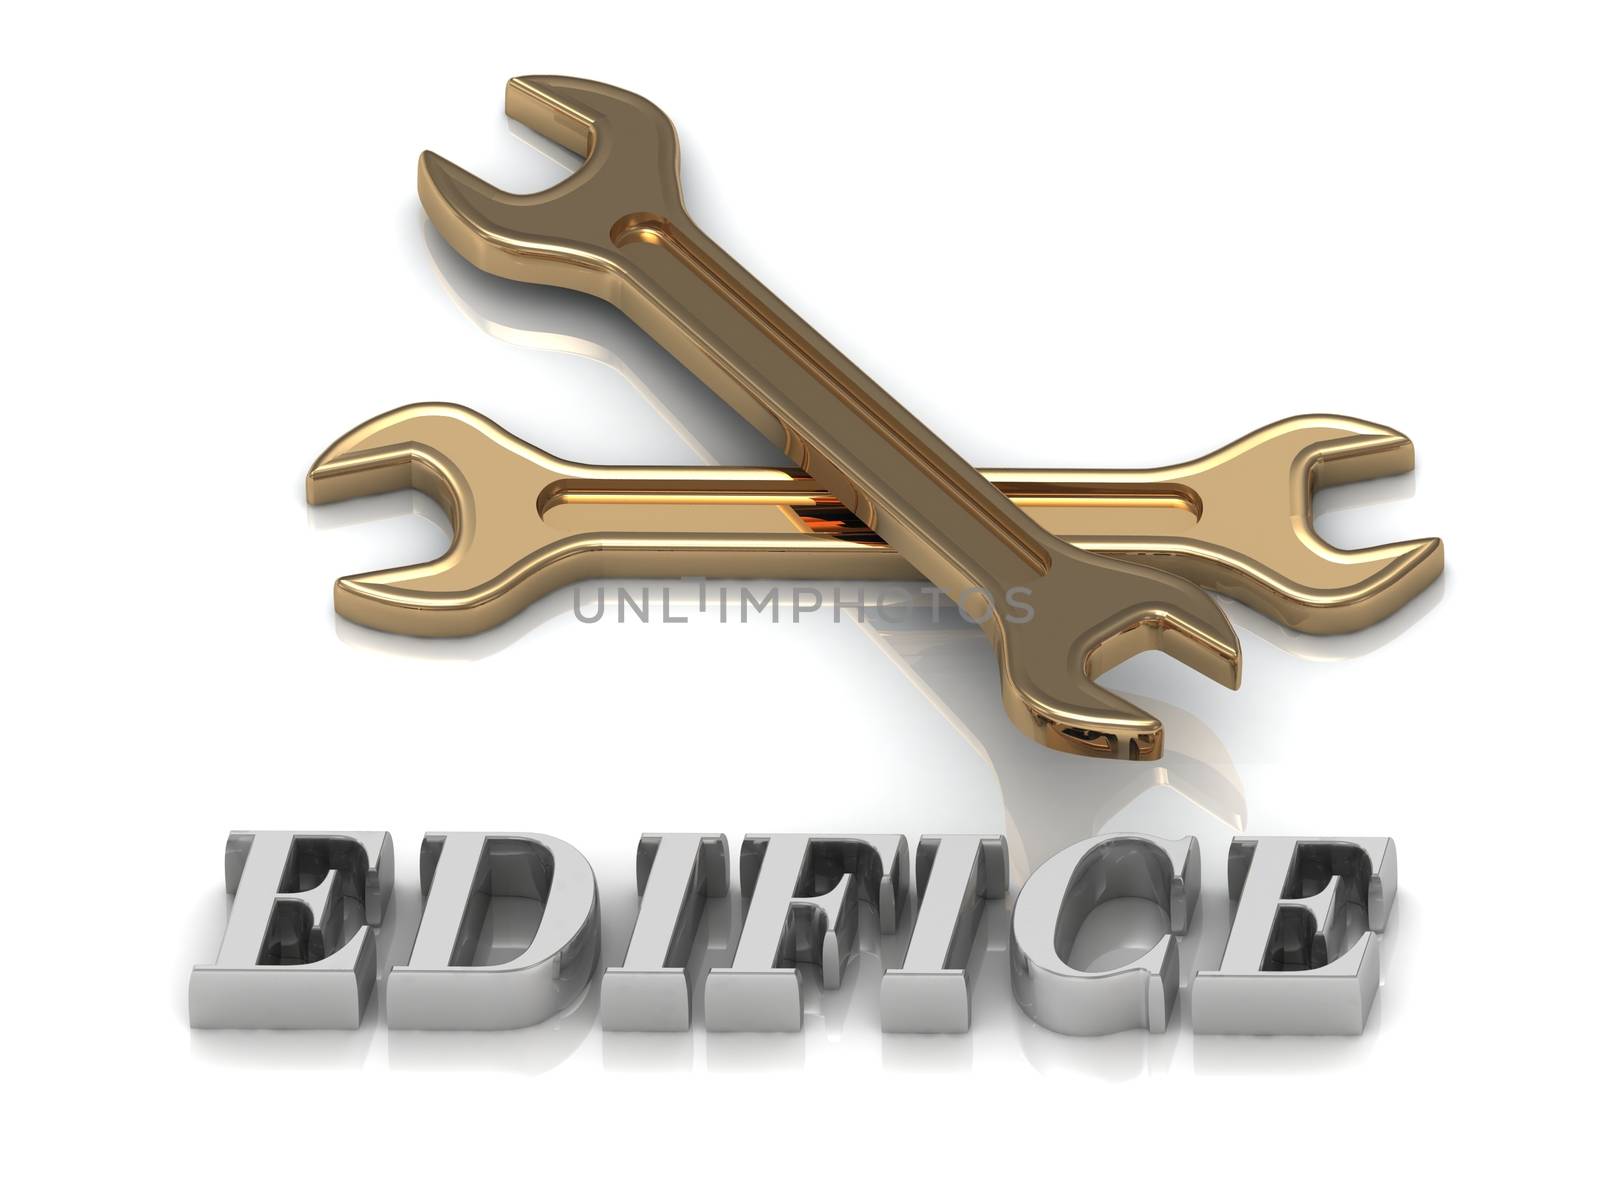 EDIFICE- inscription of metal letters and 2 keys on white background